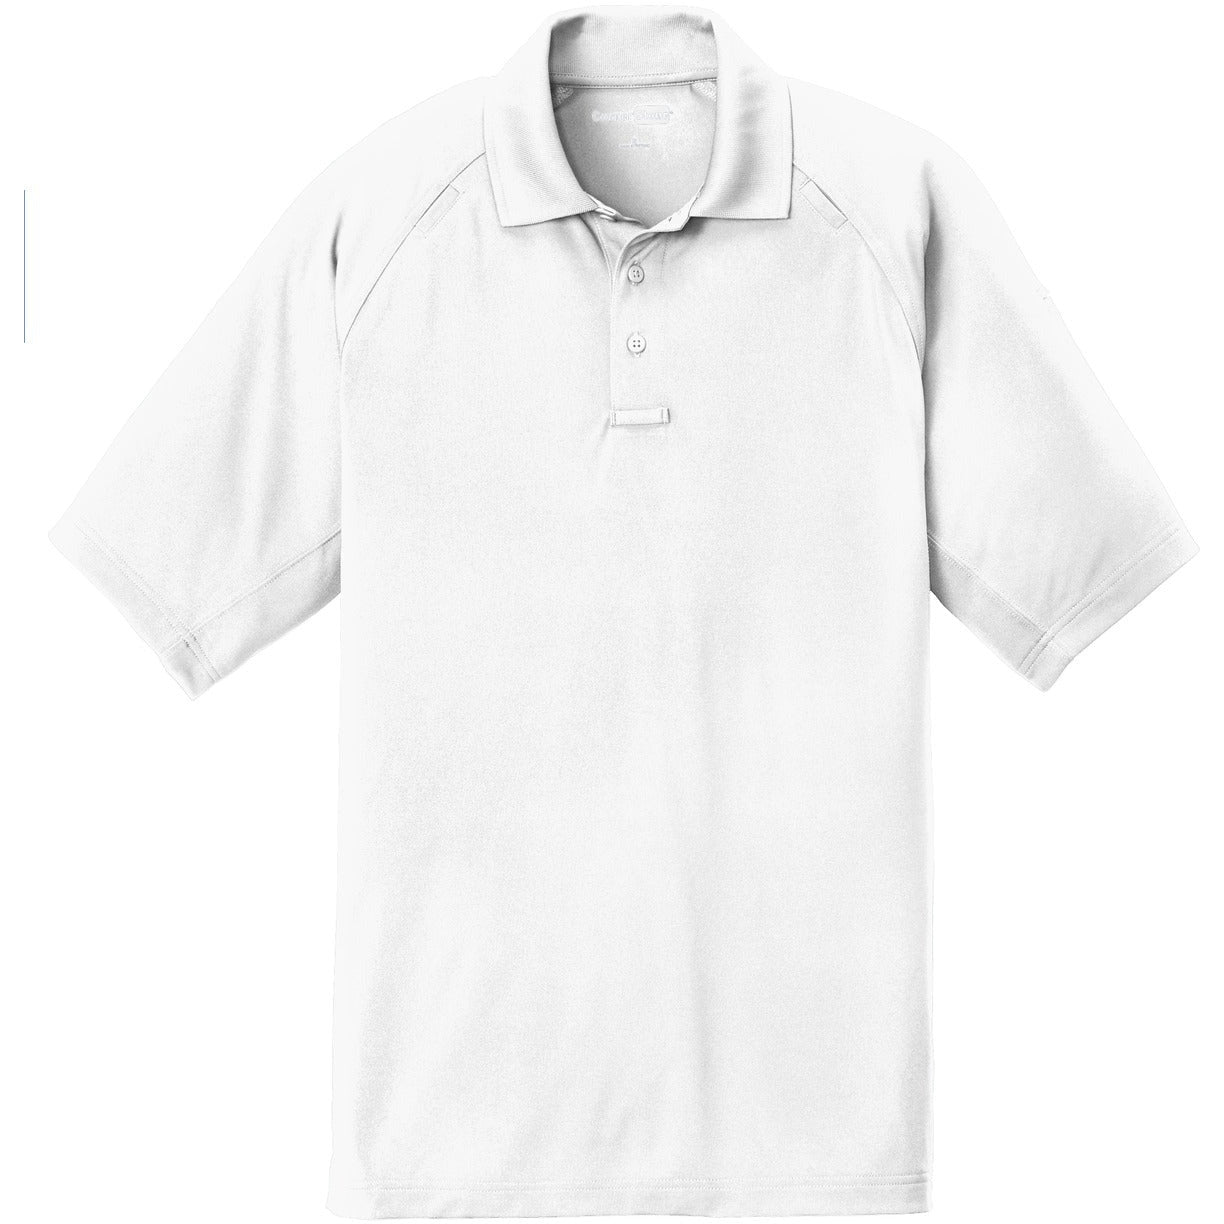 CornerStone ® Select Lightweight Snag-Proof Tactical Polo